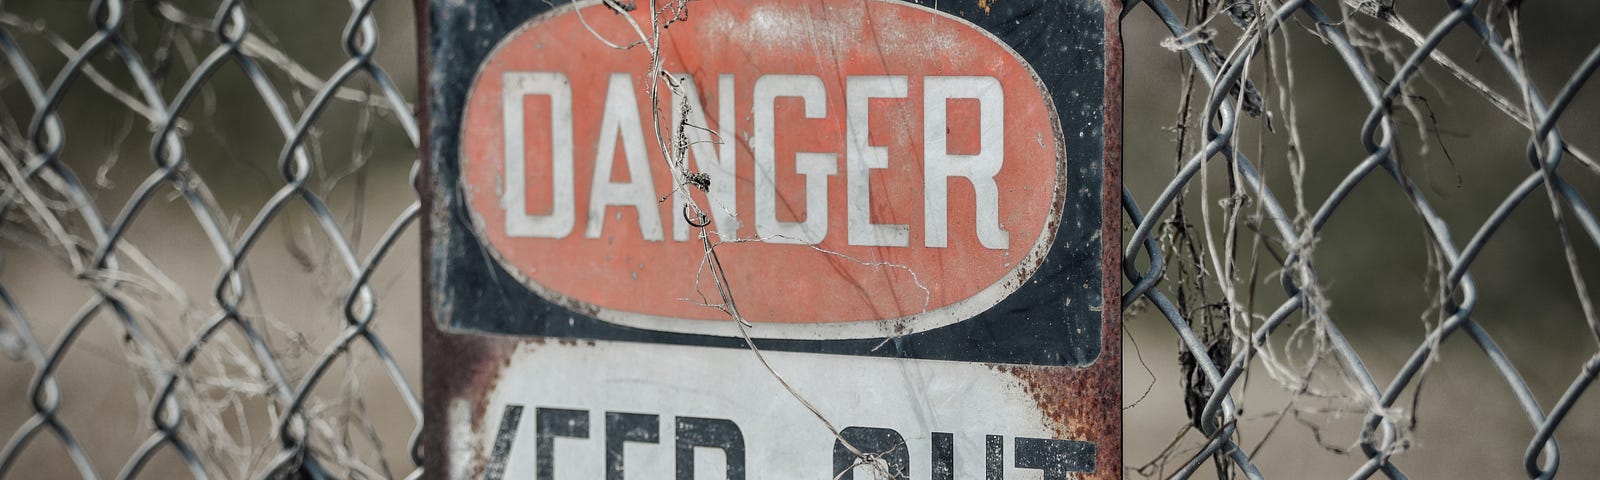 A sign on a wire fence that says “DANGER KEEP OUT.”